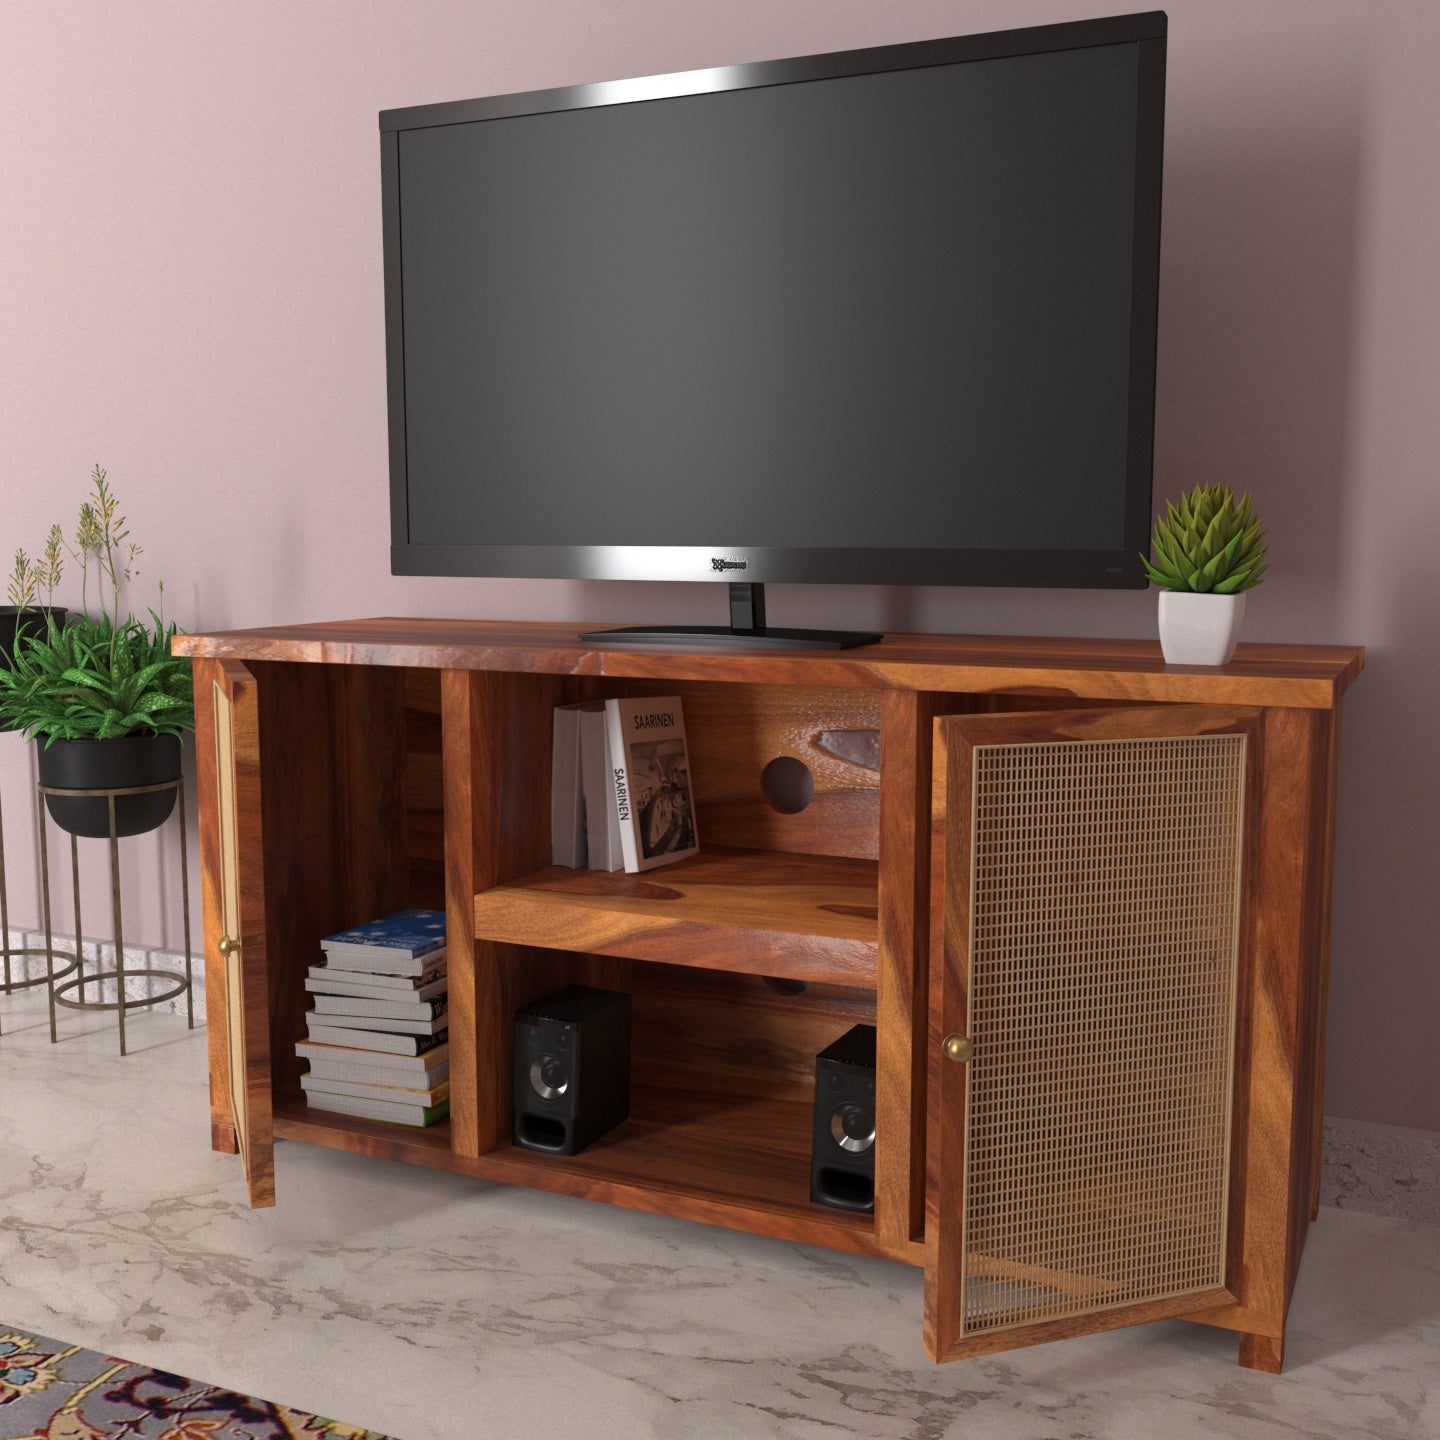 Melbourne Antique Finish Style Handmade Wooden TV Stand for Home Tv stand